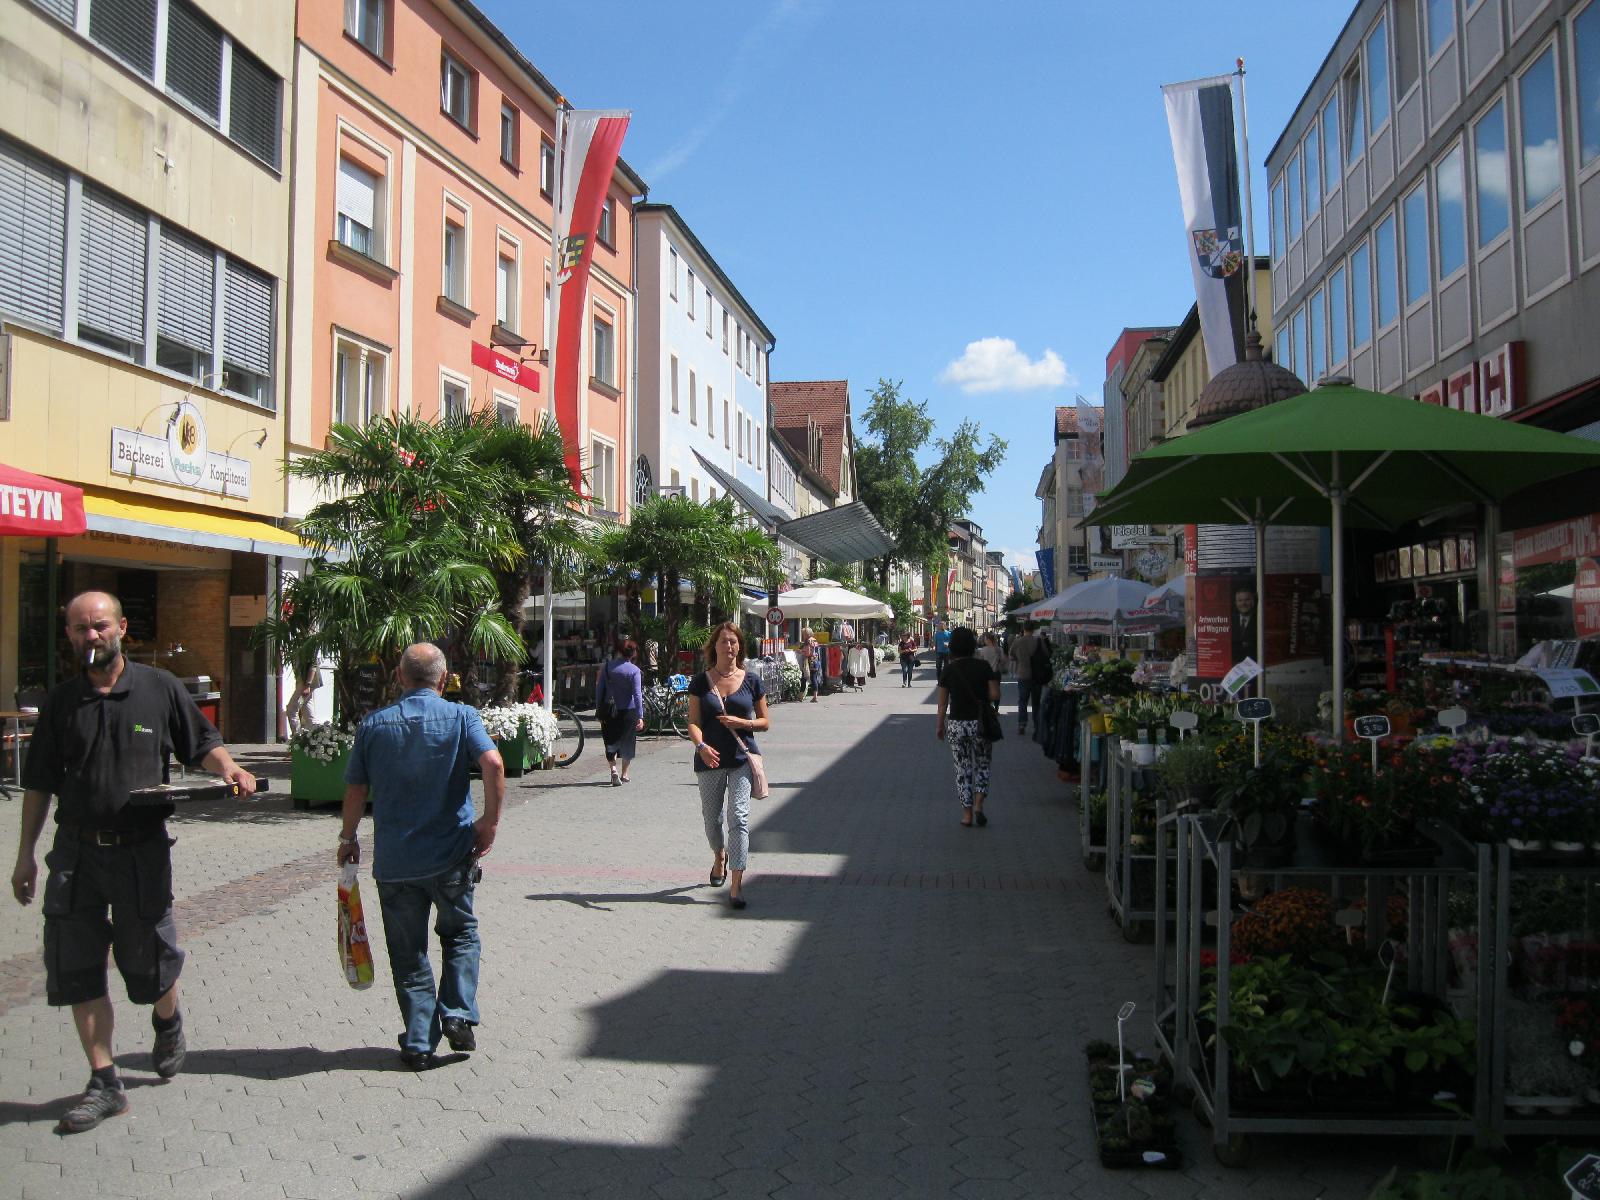 Shopping lane extending out from town square